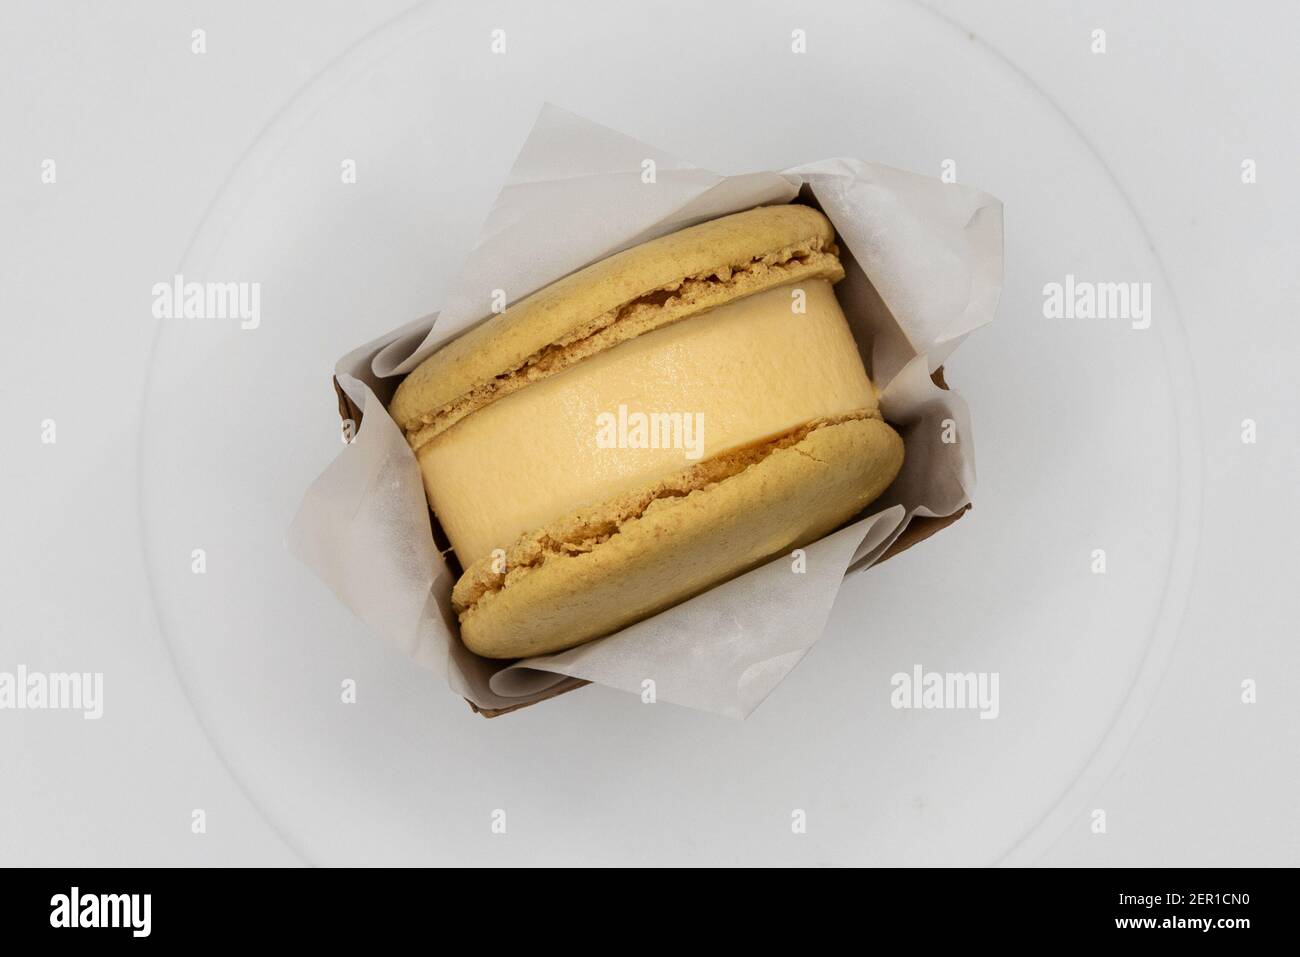 Overhead view of mango Macaron Ice Cream sandwich cookie with very sweet flavor makes perfect dessert after a meal. Stock Photo